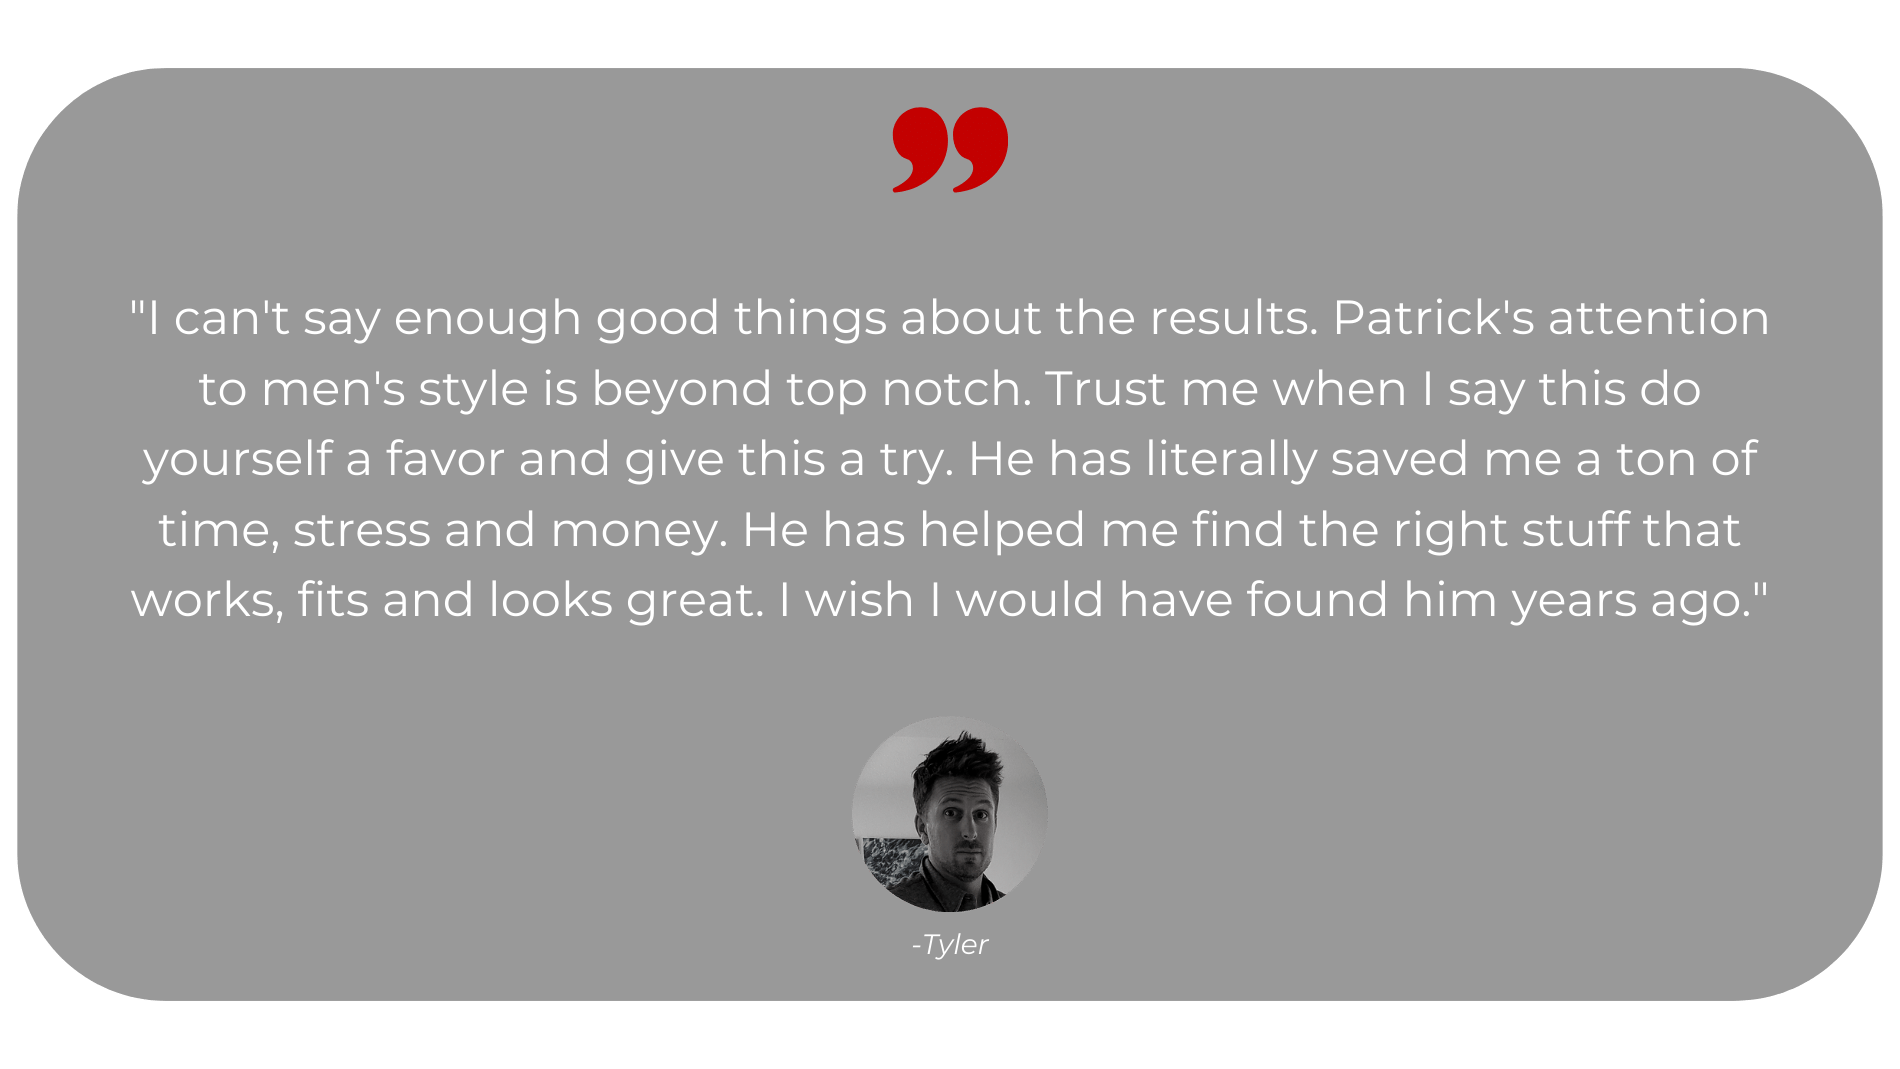 personal-stylist-Pivot-Image-consulting-review (68)-min.png